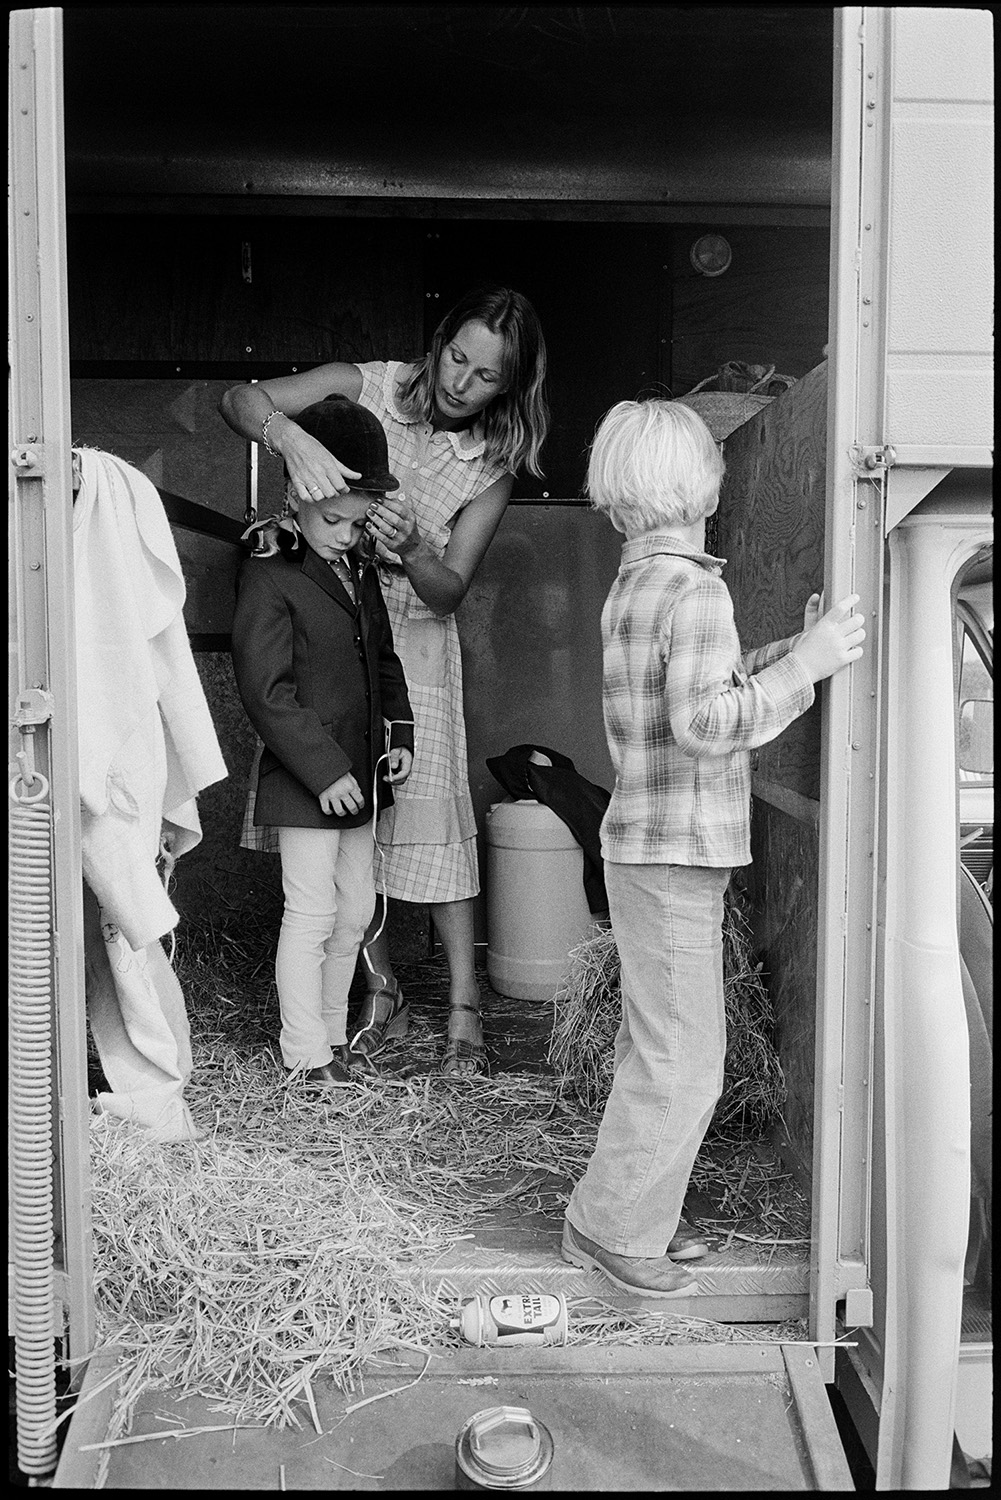 Competitors preparing gymkhana, horseboxes. 
[A woman in a horsebox putting a riding hat on a child, ready to compete in the Beaford Gymkhana. Another child is watching them.]